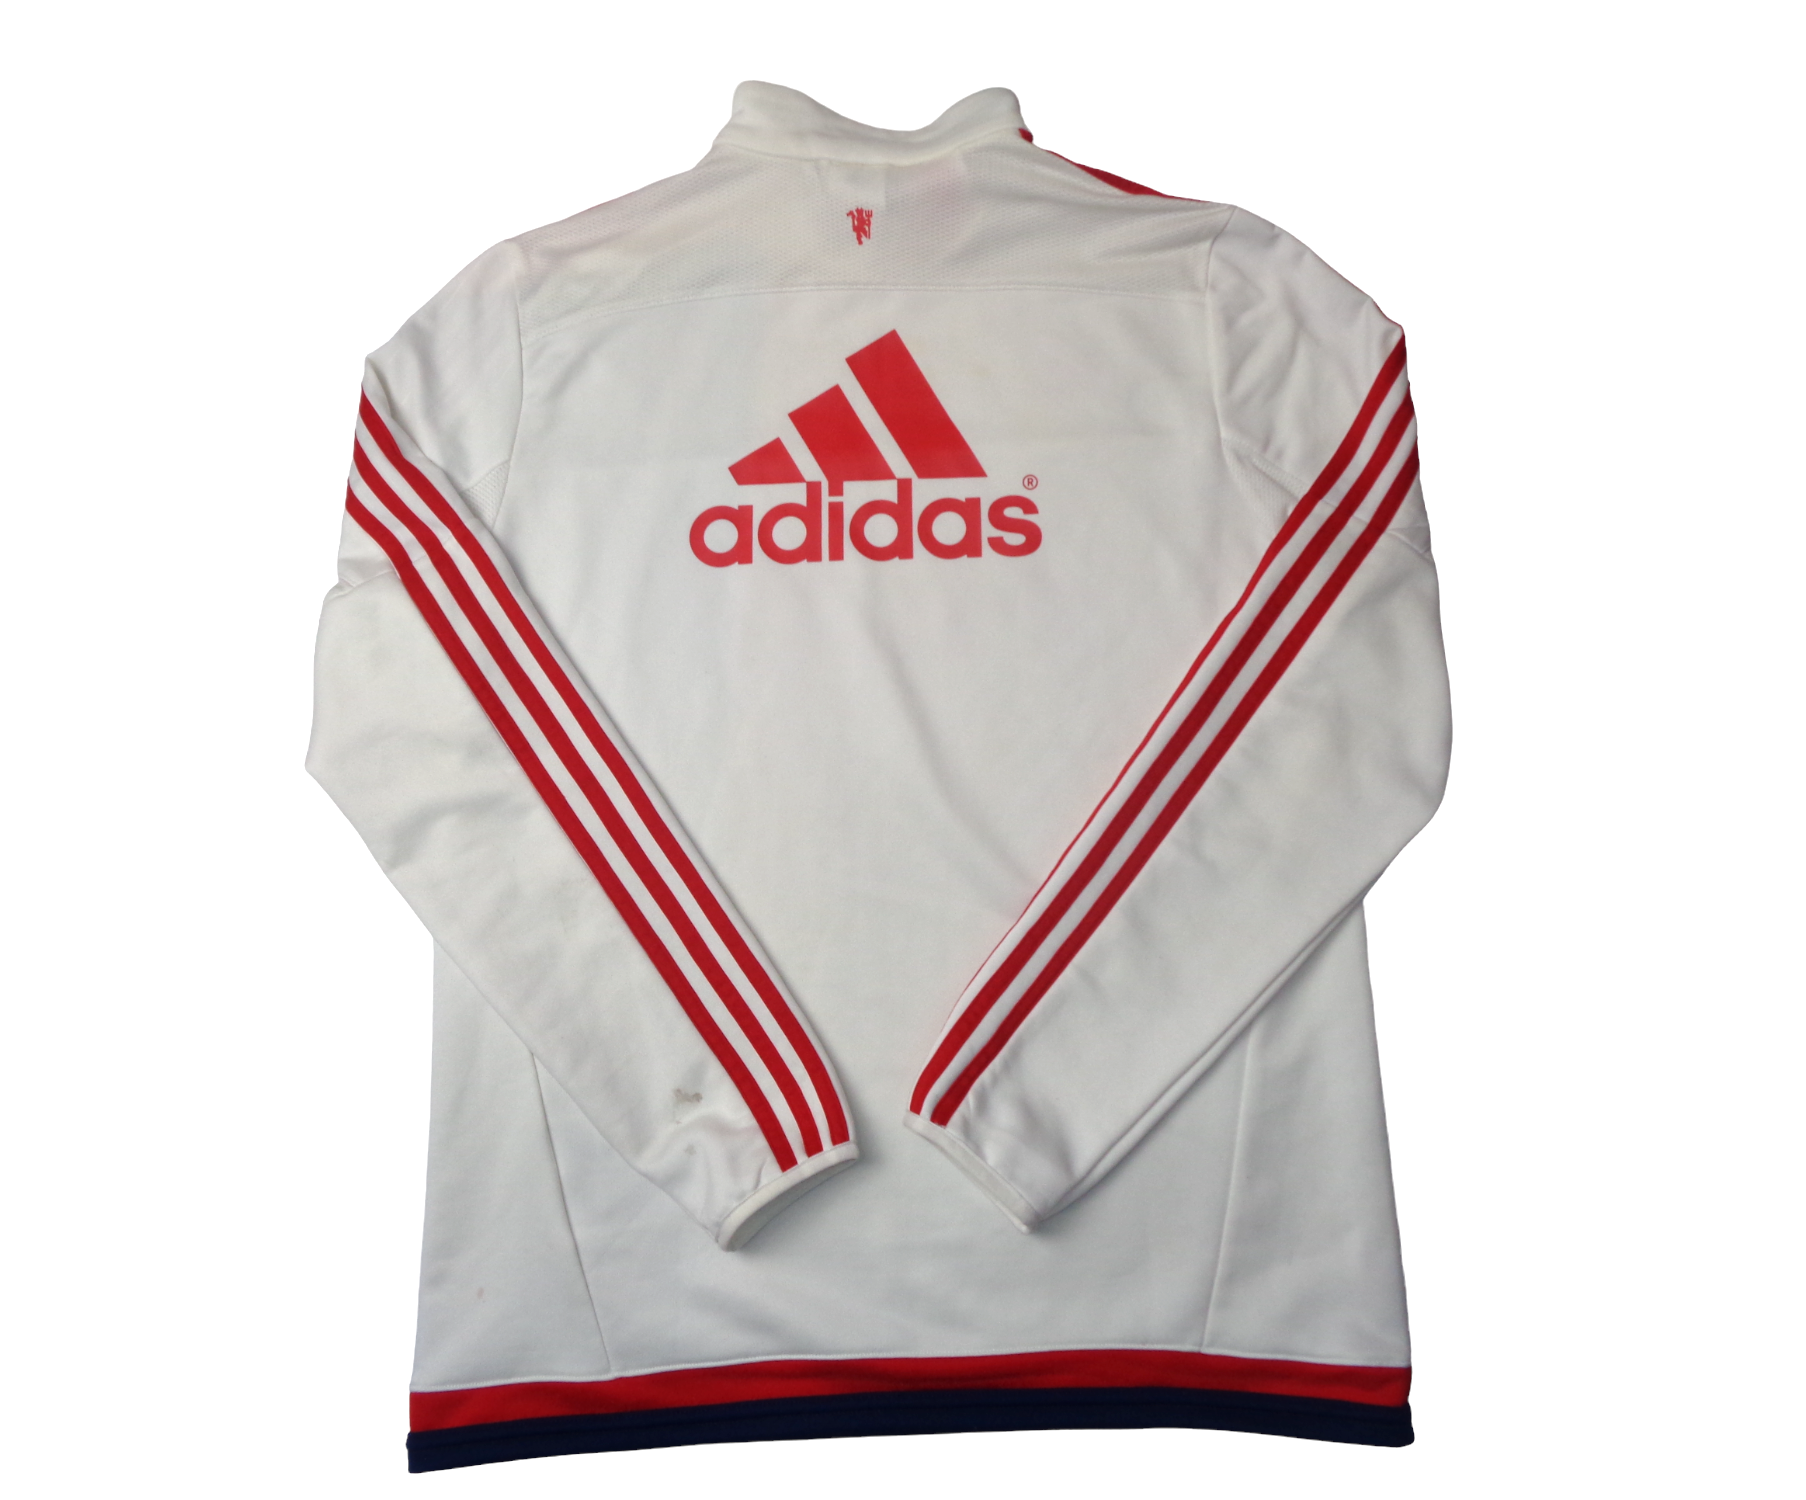 MANCHESTER UNITED ADIDAS TRAINING DRILL TOP - ADIDAS - SIZE 15-16 YEARS